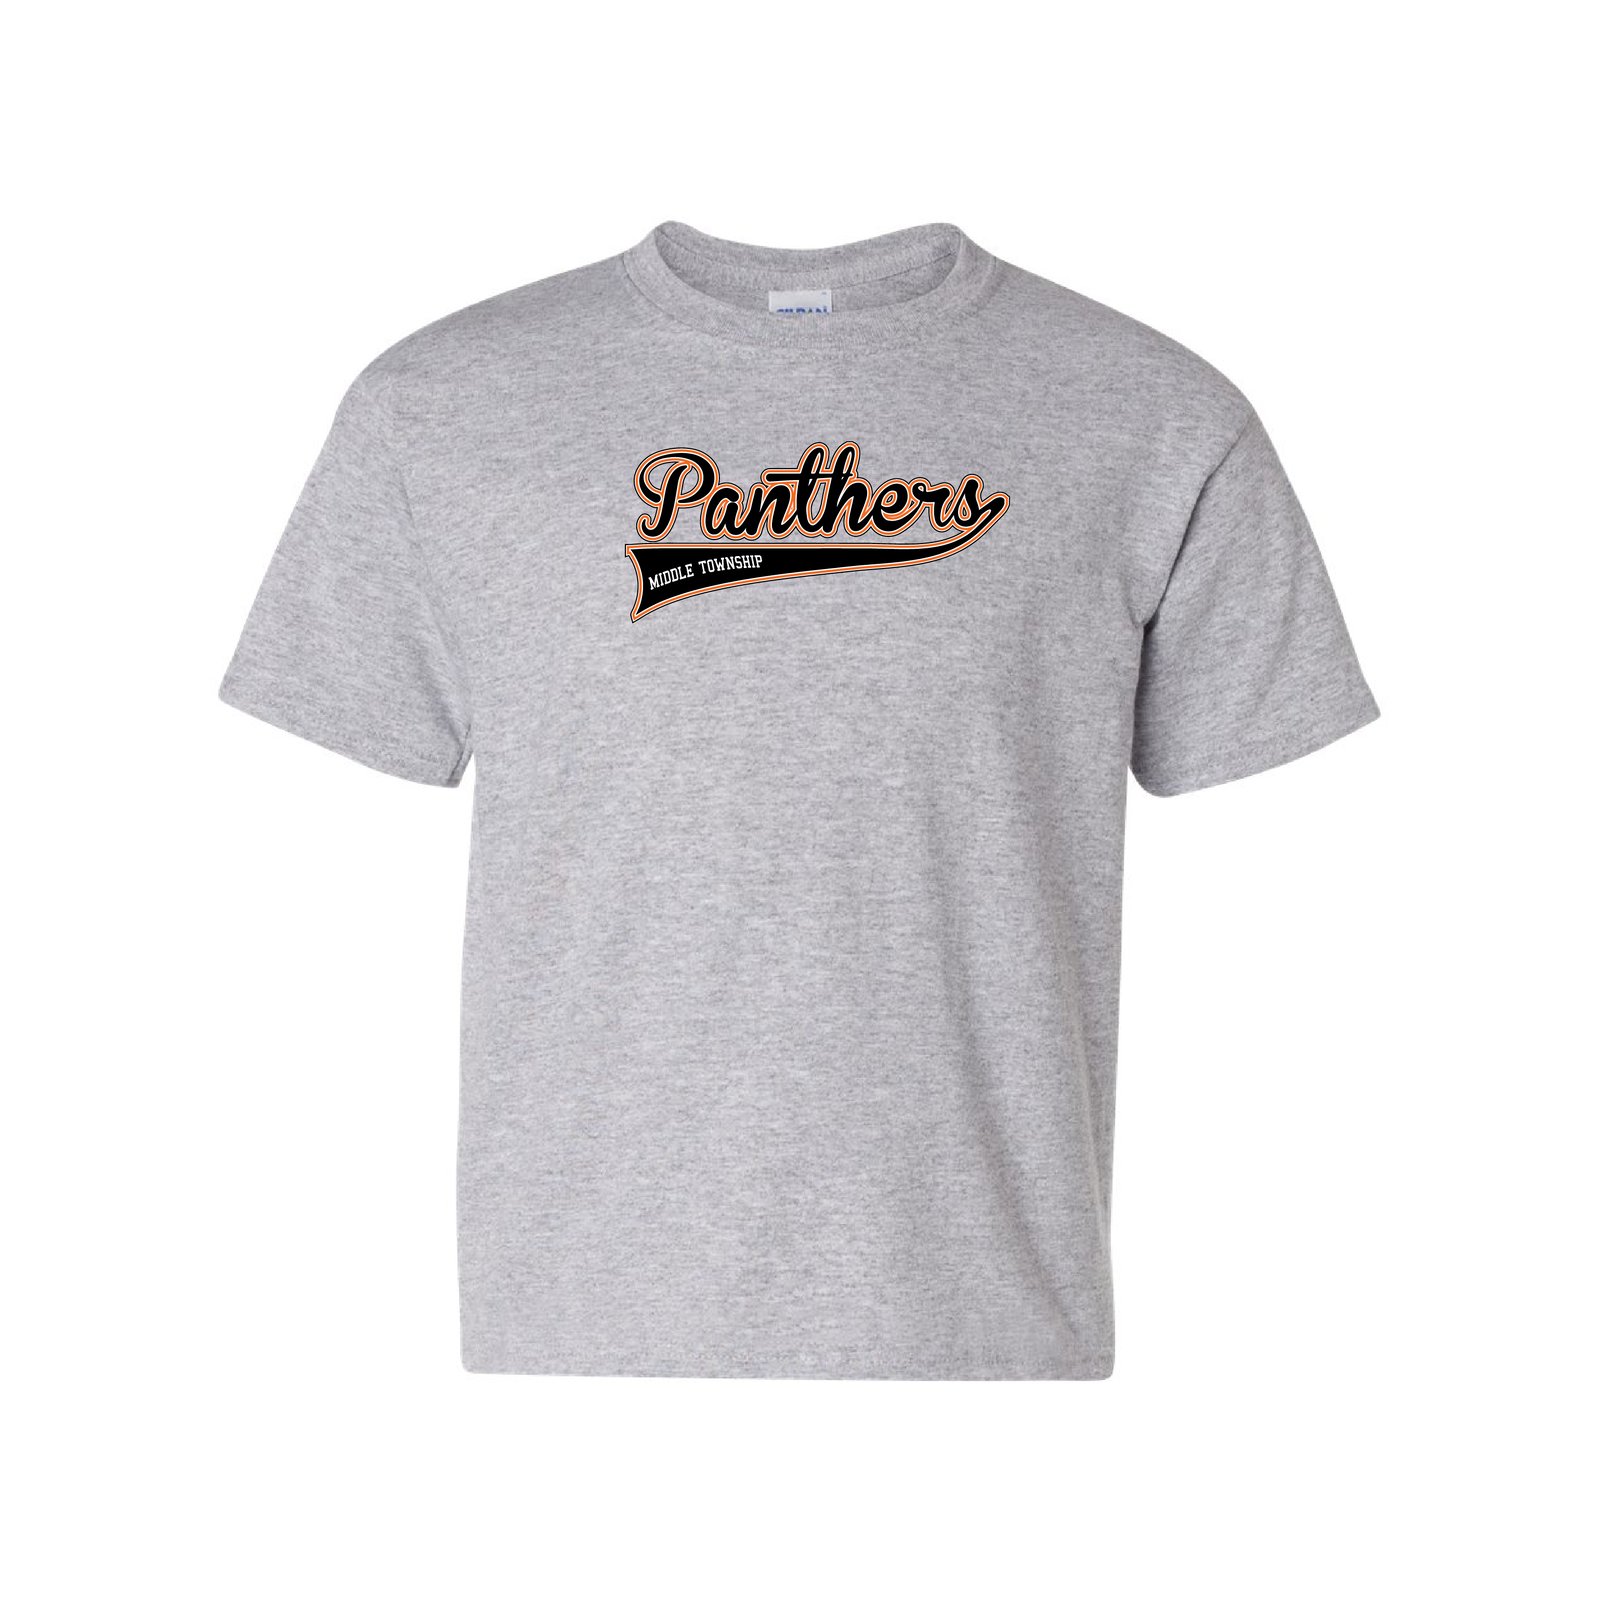 youth panthers t shirt